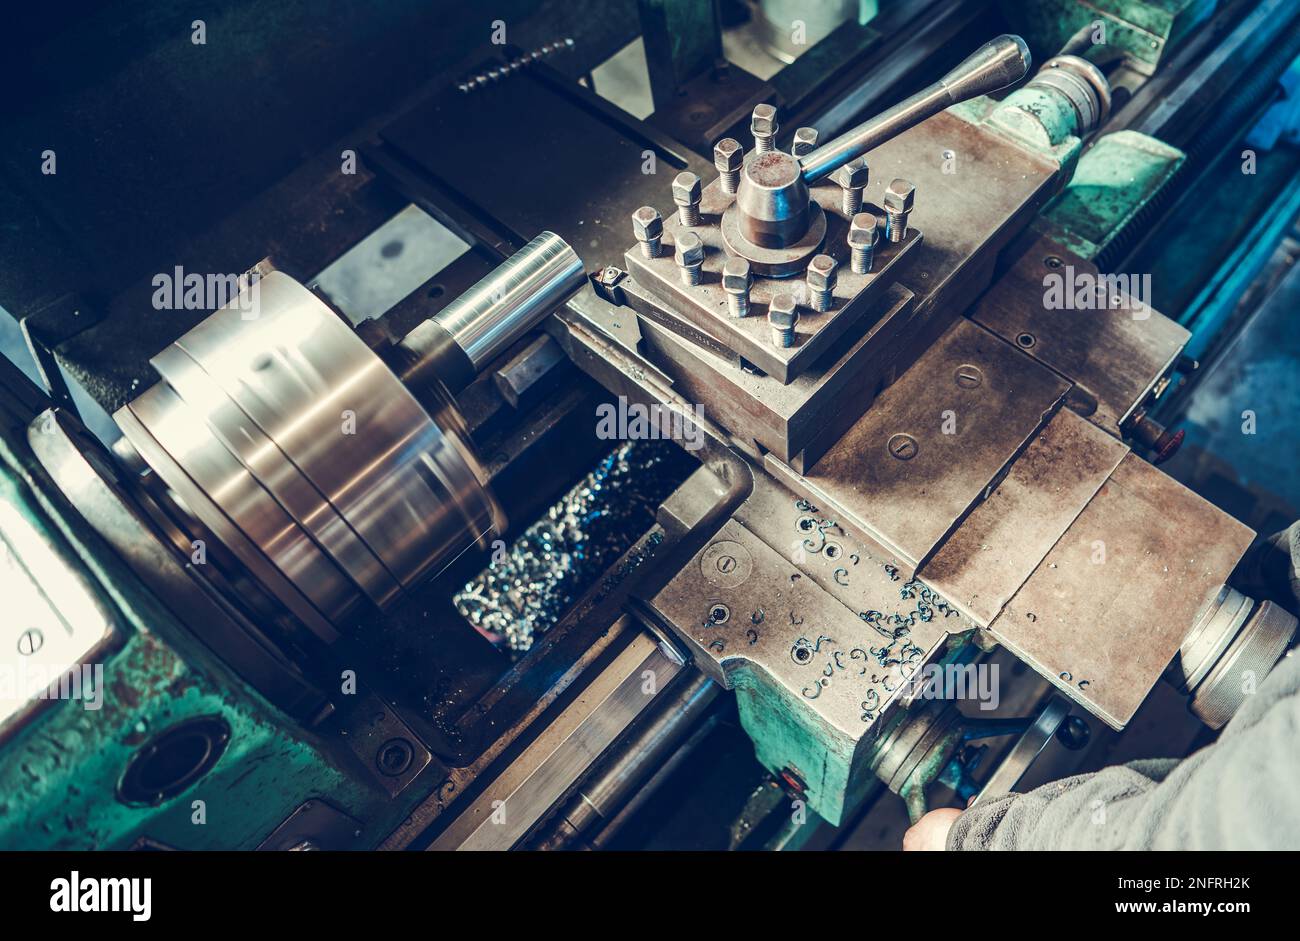 Top View Closeup of Metalworking Lathe Machine. Production Technology and Manufacturing Equipment Theme. Stock Photo